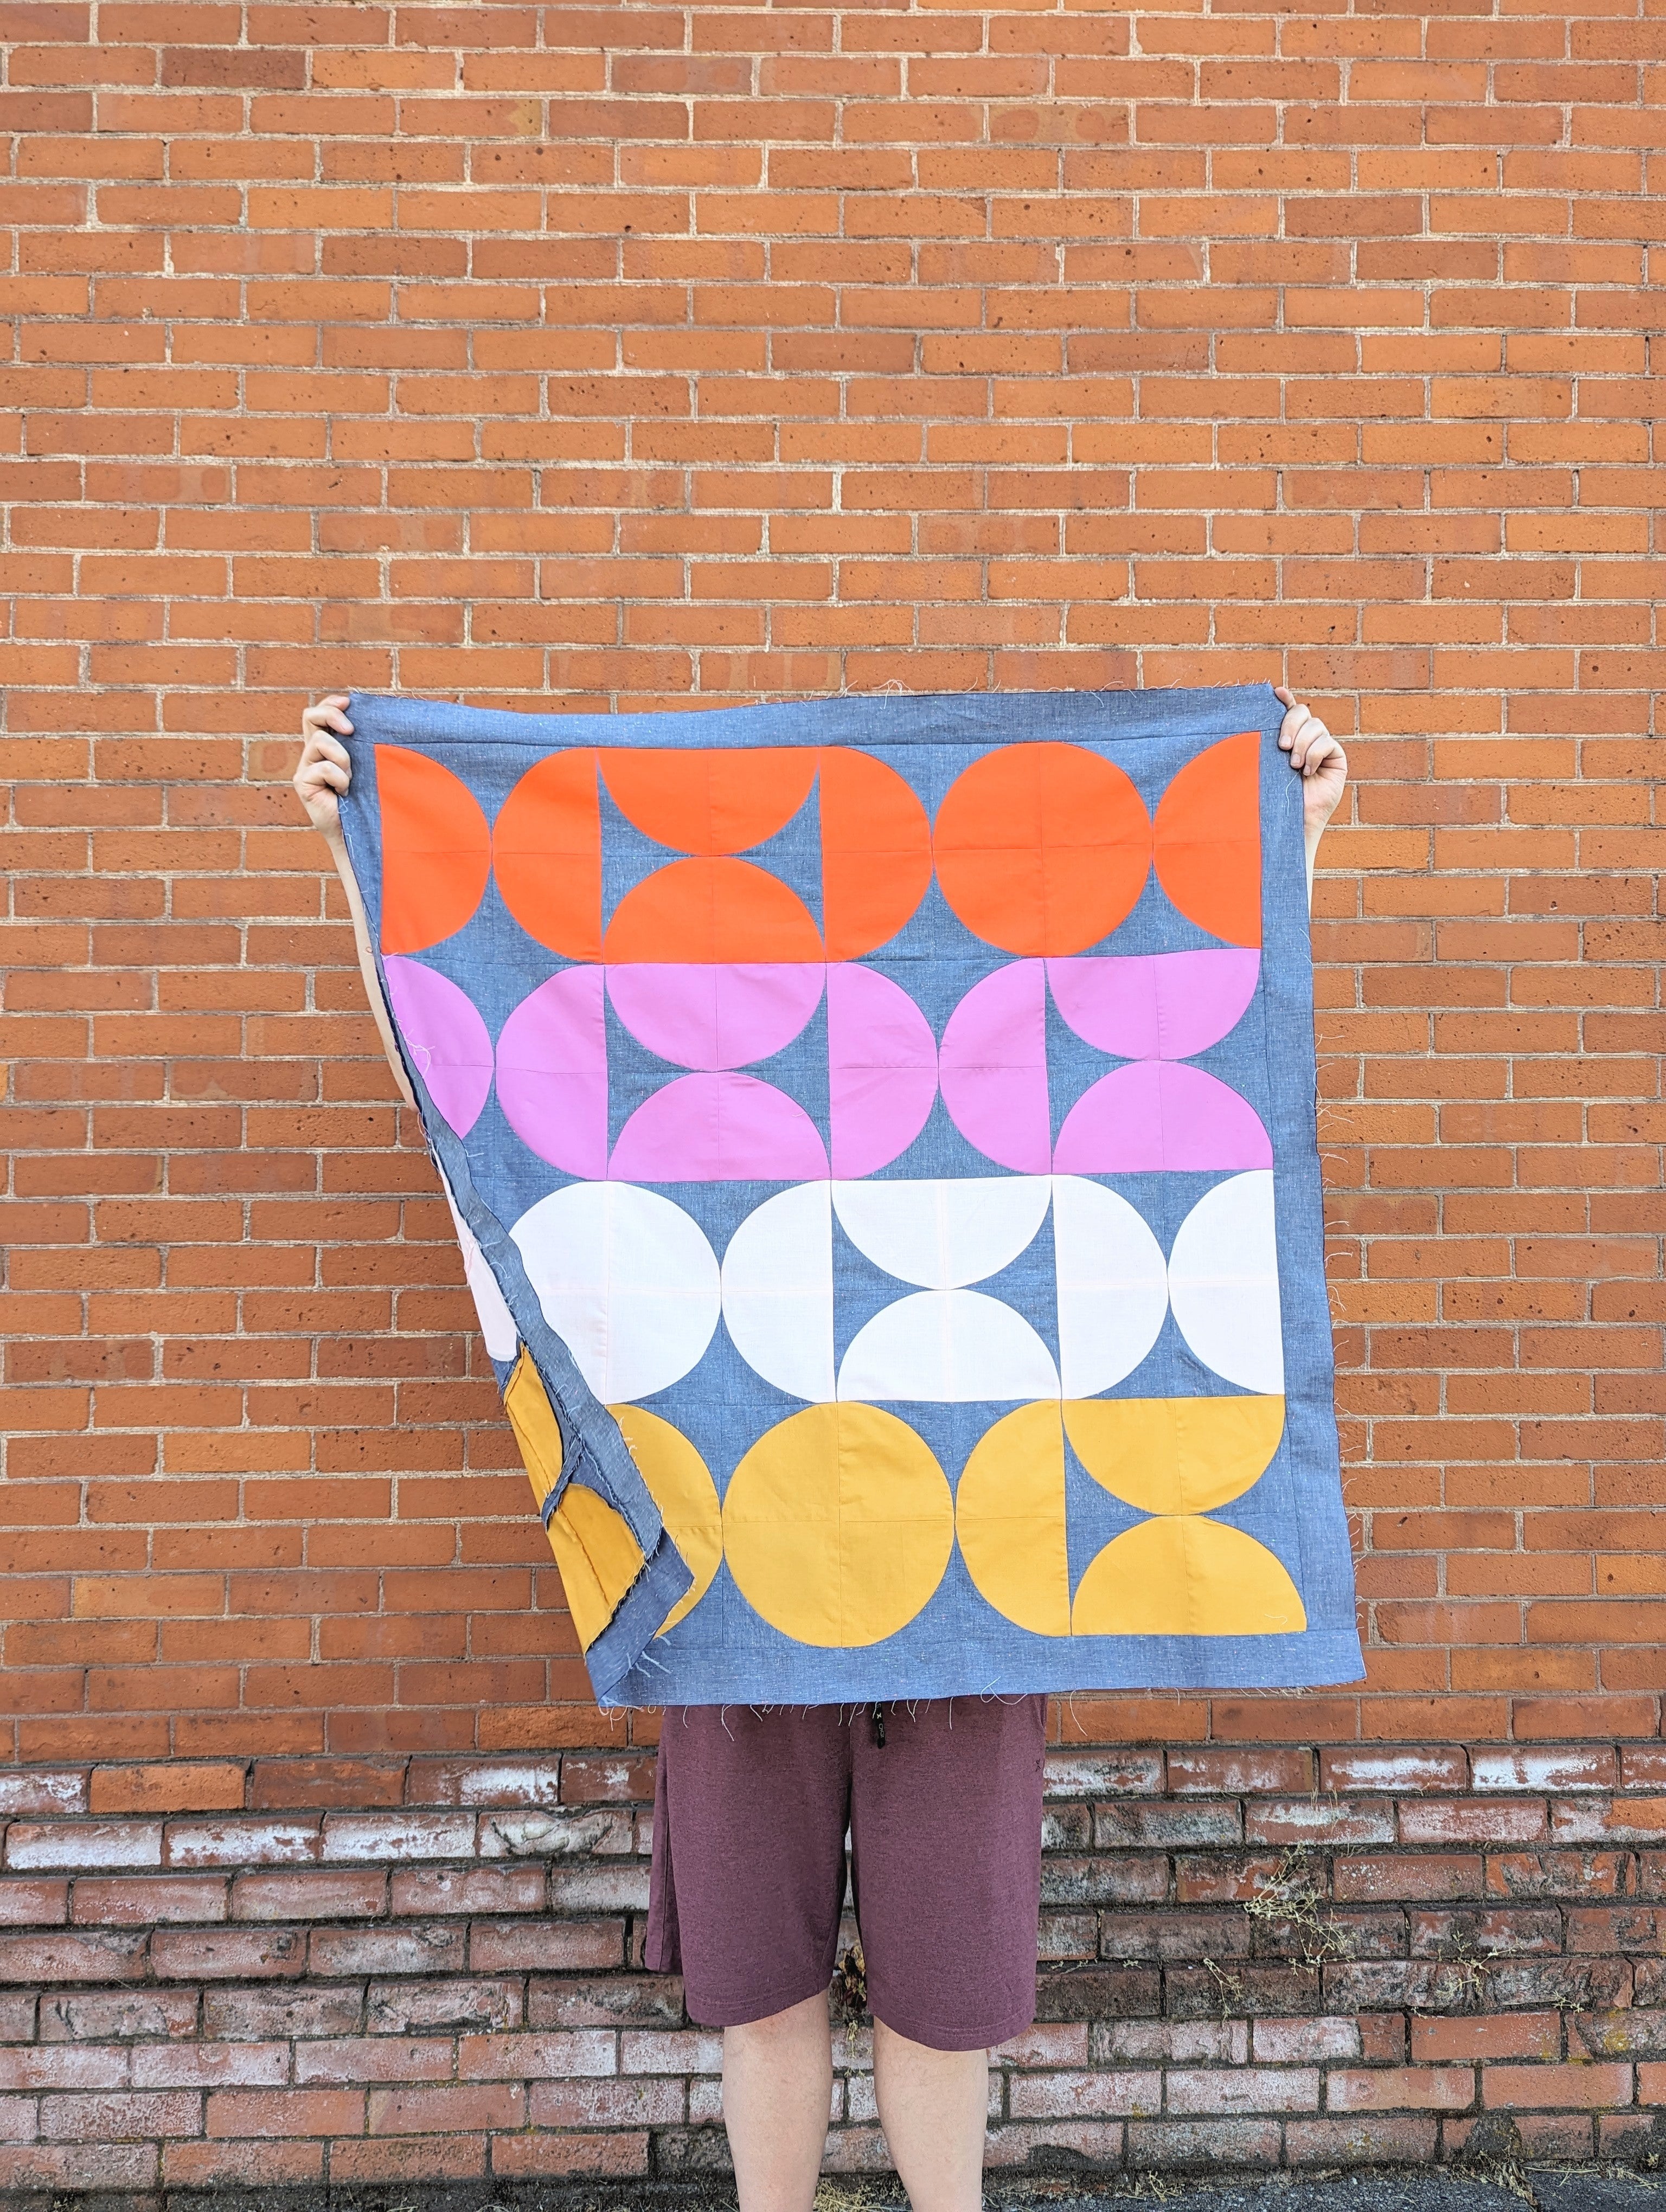 Reverie Quilt made by Maechen. A modern quilt design with curved piecing perfect for quilters of all levels, even beginners.